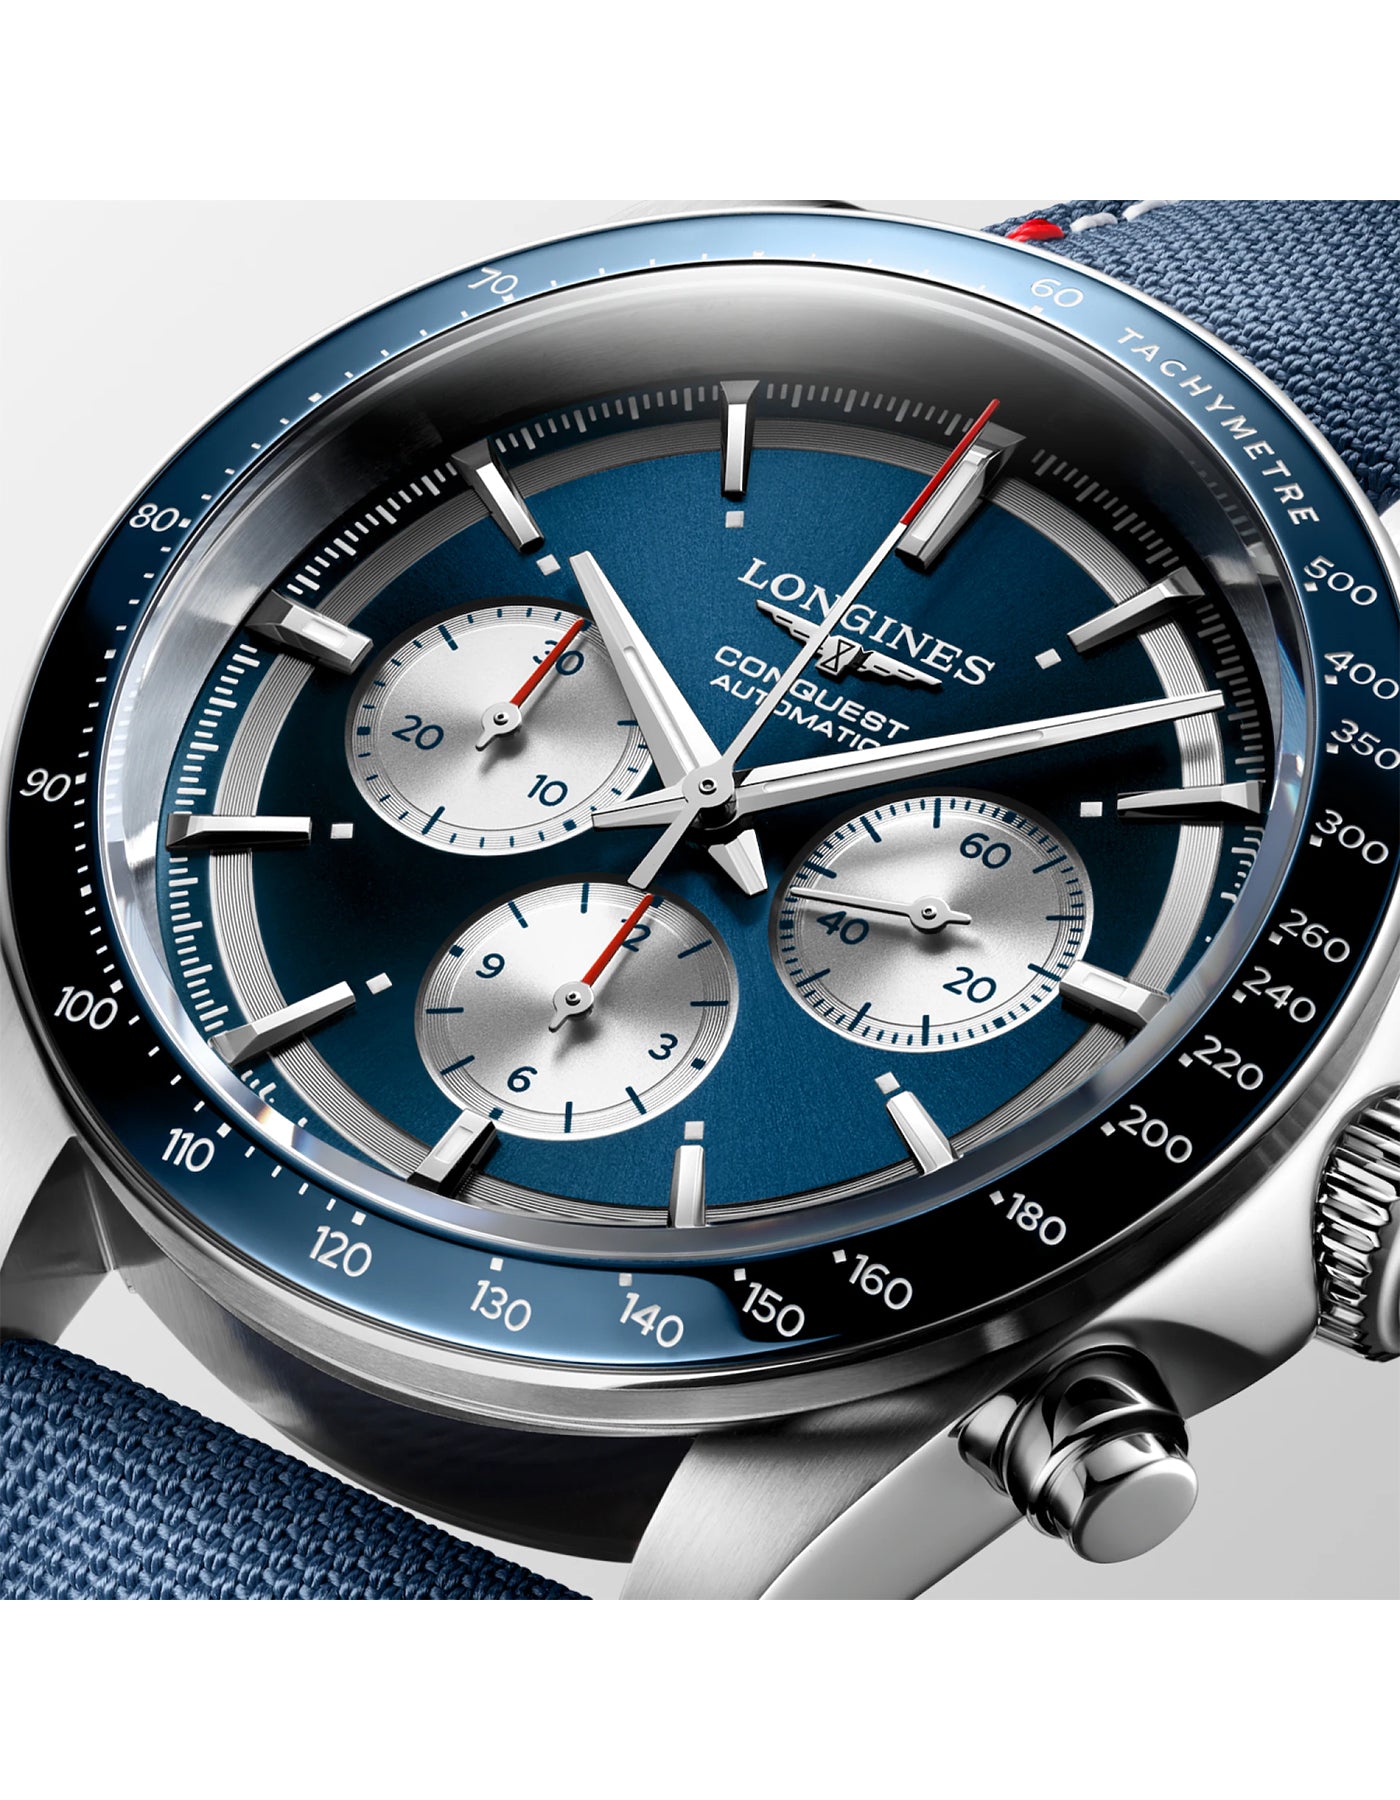 CONQUEST MARCO ODERMATT LIMITED EDITION 2042